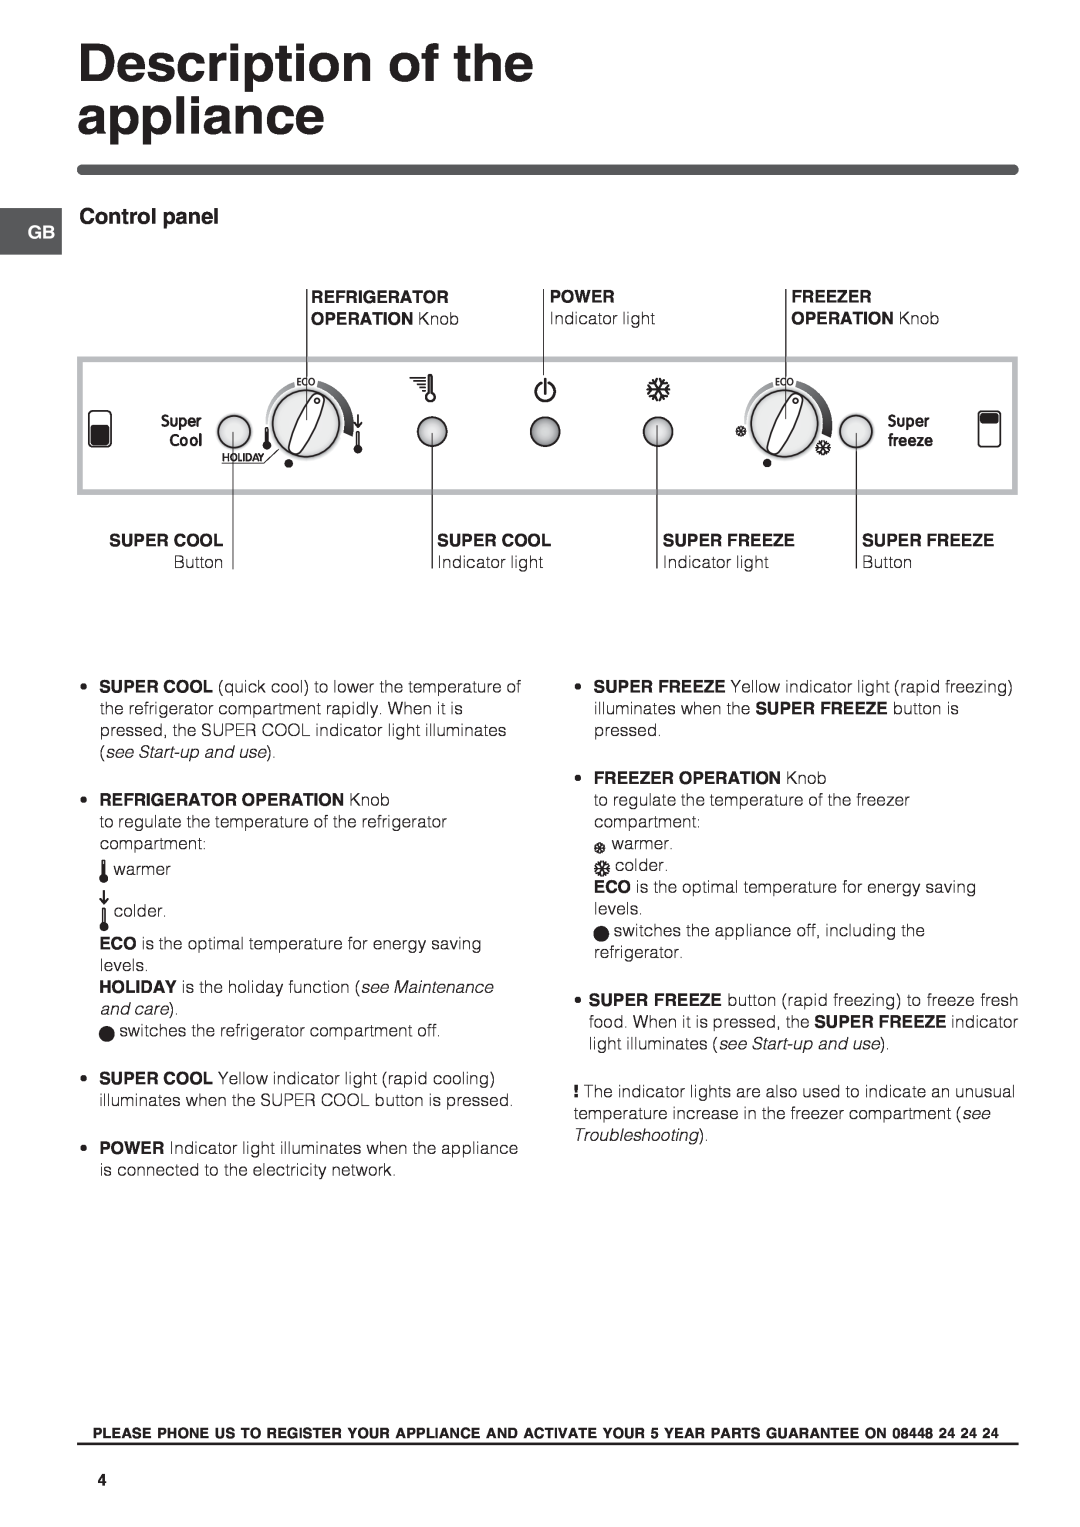 Indesit TAN 6 FNF S, TAAN 6 FNF SI manual Description of the appliance, Control panel, Super Freeze 